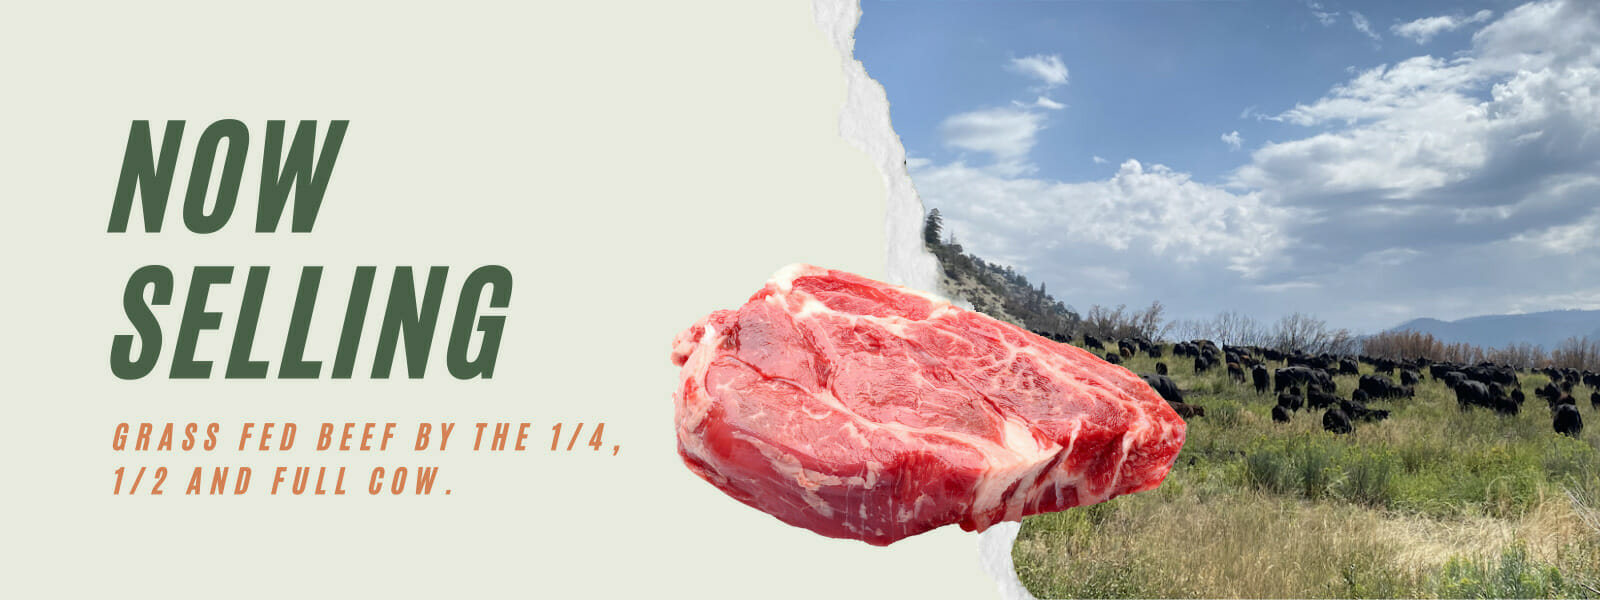 Grass Fed Beef in Colorado